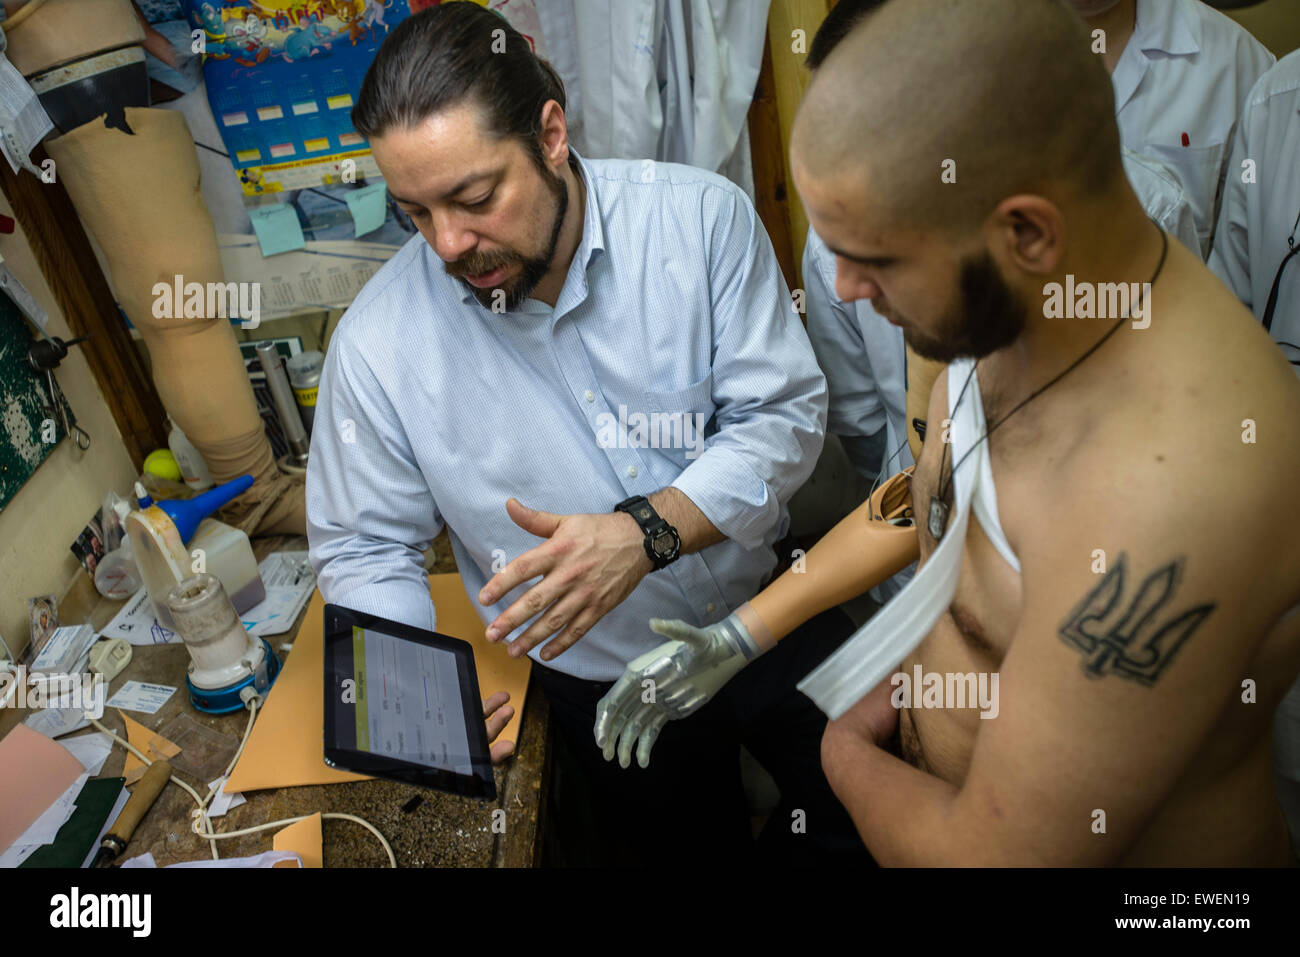 American prosthetist Chris Fantini shows how to use software ruling limb from tablet to Vasyl Pelysh, losted his hand in captivity at Donbas, when pro-Russian terrorists brutally cut it because of tattoo with Ukrainian national sign and phrase 'Honor to Ukraine'. Ukraine Prosthetic Assistance Project, charity project organized by Ukrainian and Canadian medical workers and public figures to transfer prosthetic and rehabilitation knowledge from American and Canadian specialists to their colleagues in Ukraine. During project five Ukrainians received high quality bionic prosthesis, including three Stock Photo